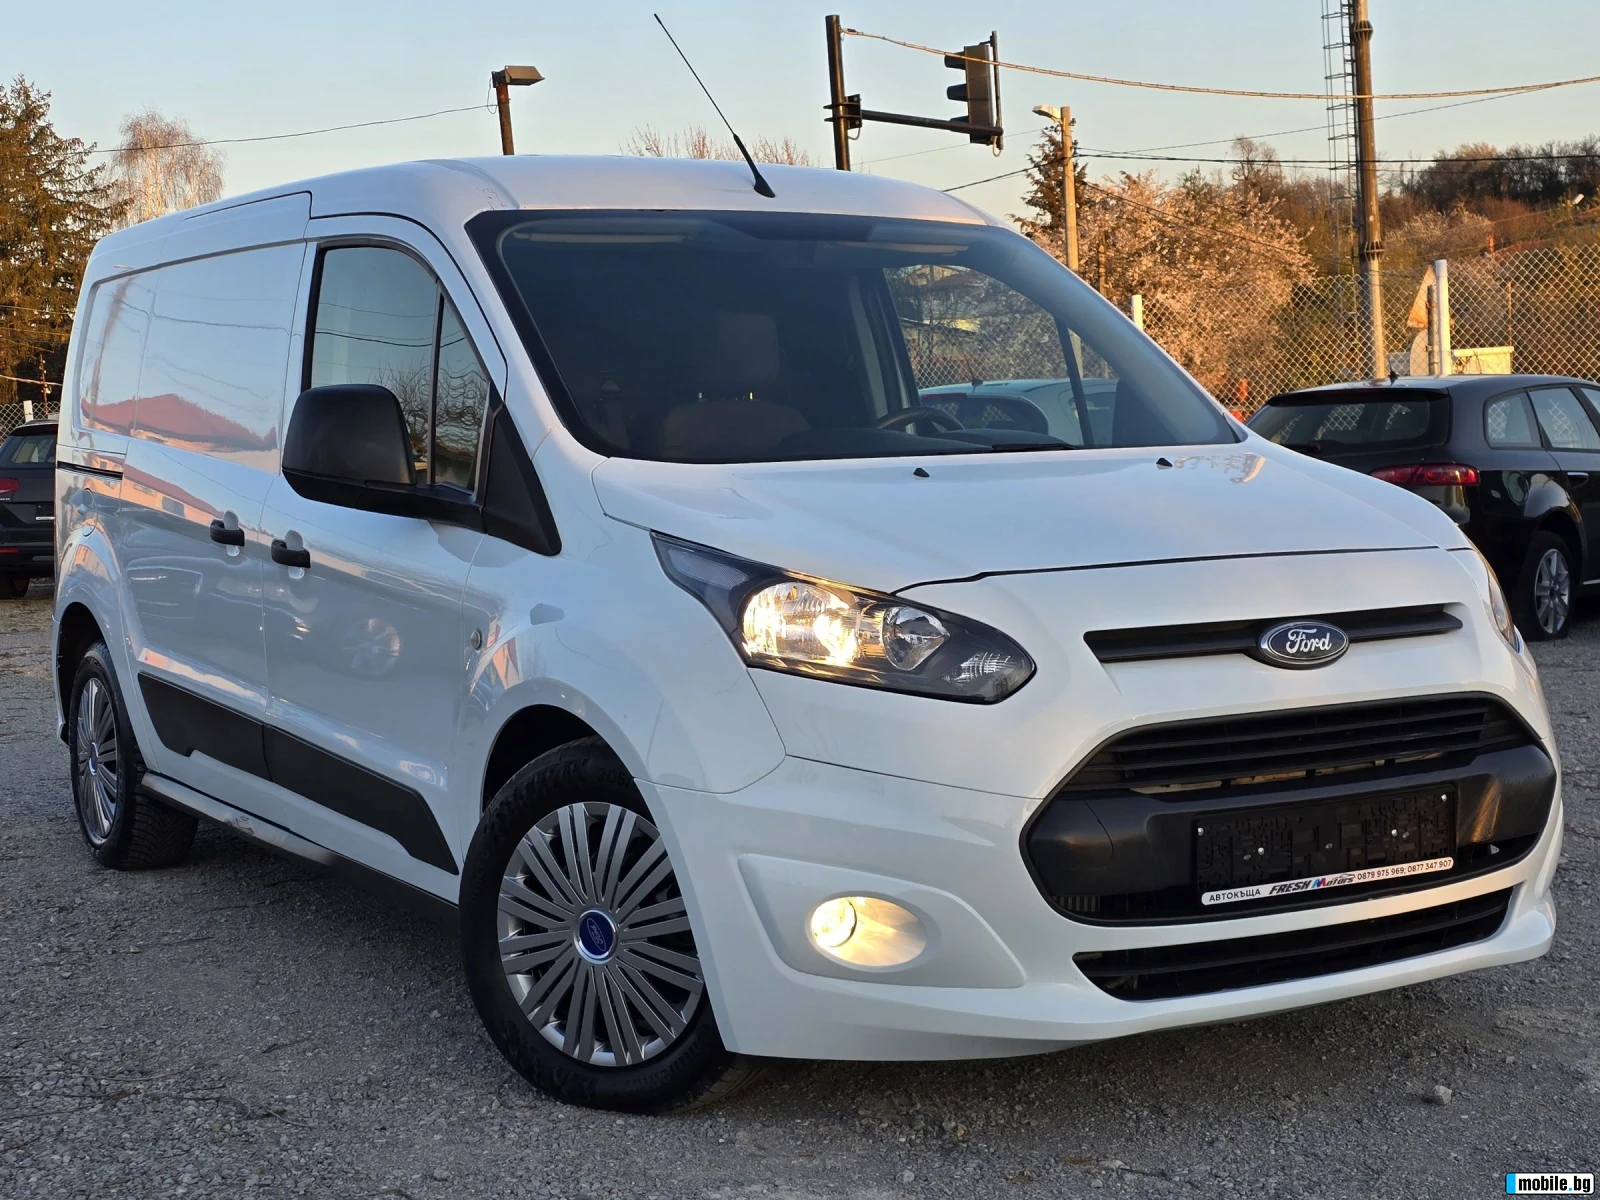 Ford Connect  1.6 TDCI 116 ..   6 | Mobile.bg   2